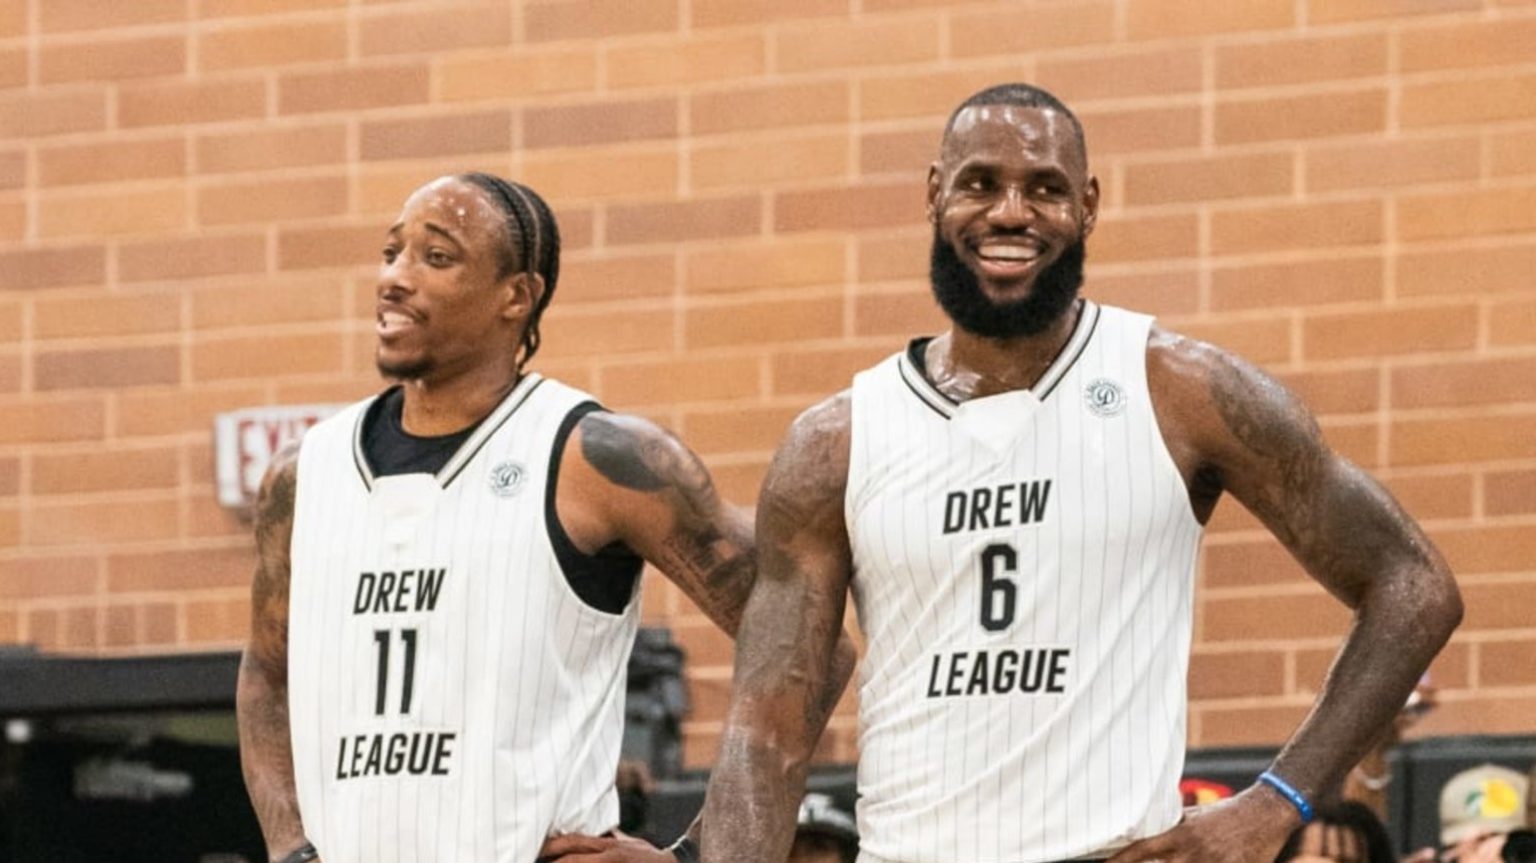 DeMar DeRozan on Playing With LeBron James in Drew League